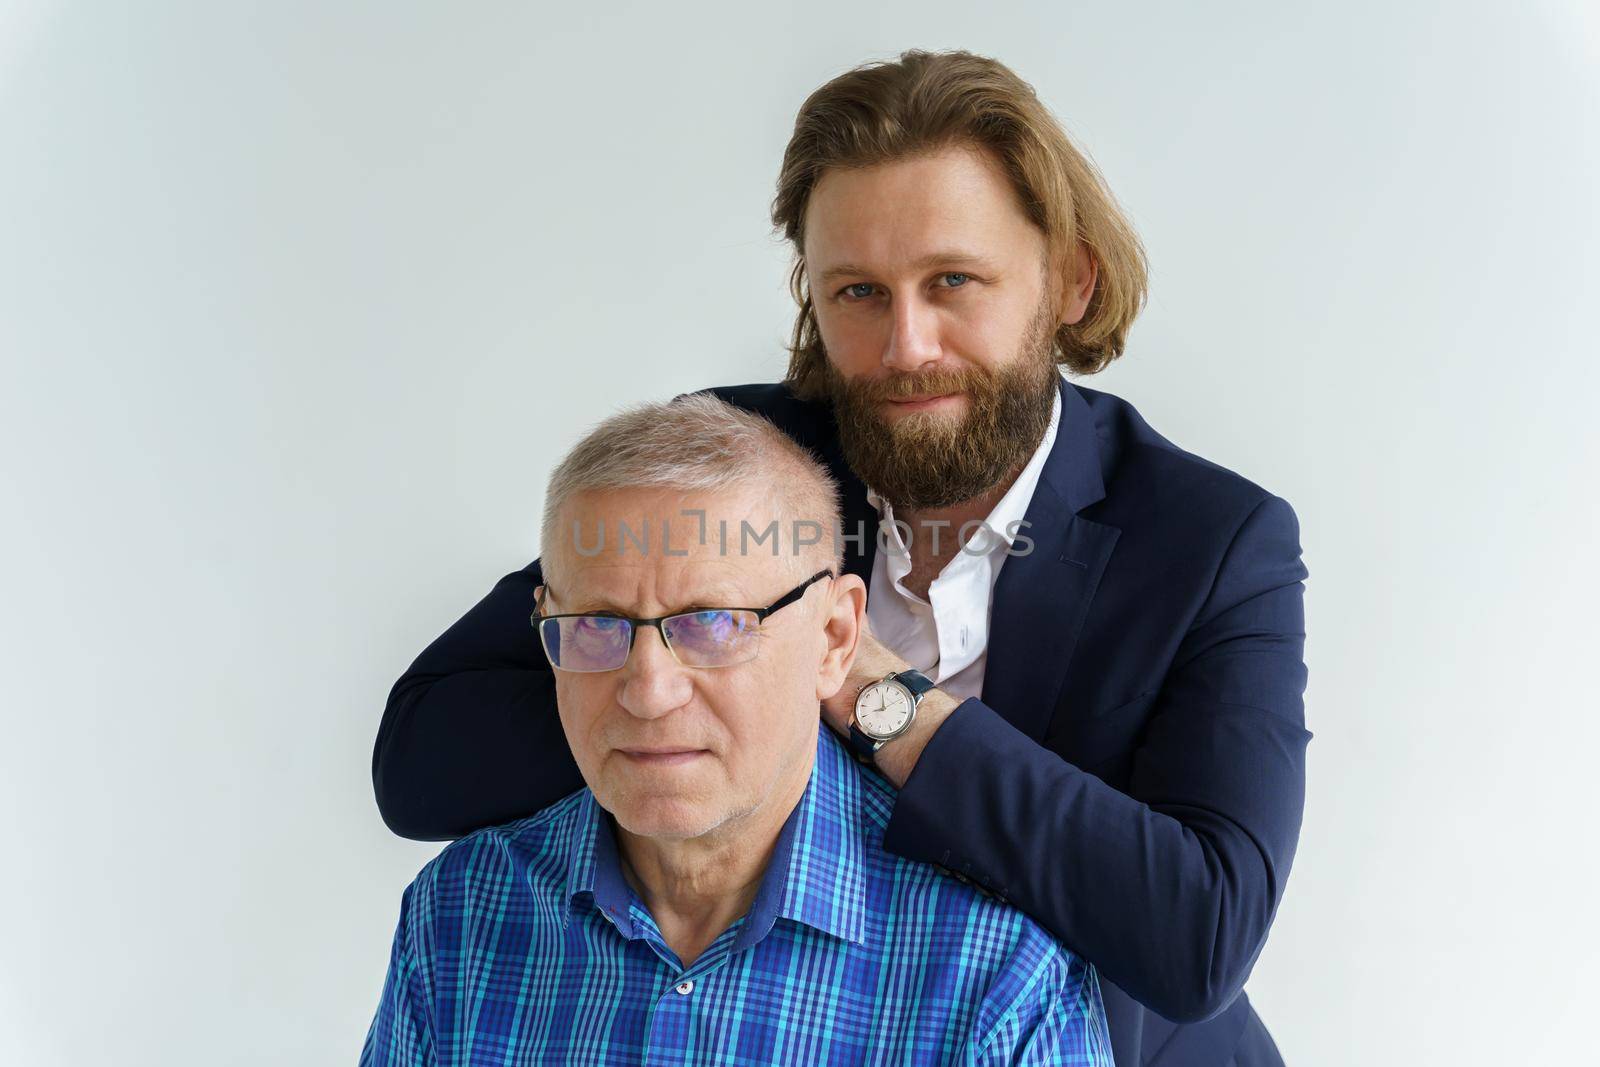 the son in a stylish suit leans on the shoulders of his father, Father and son in white background, both men look into the camera, an elderly man in glasses, young man with a beard and long hair. High quality photo